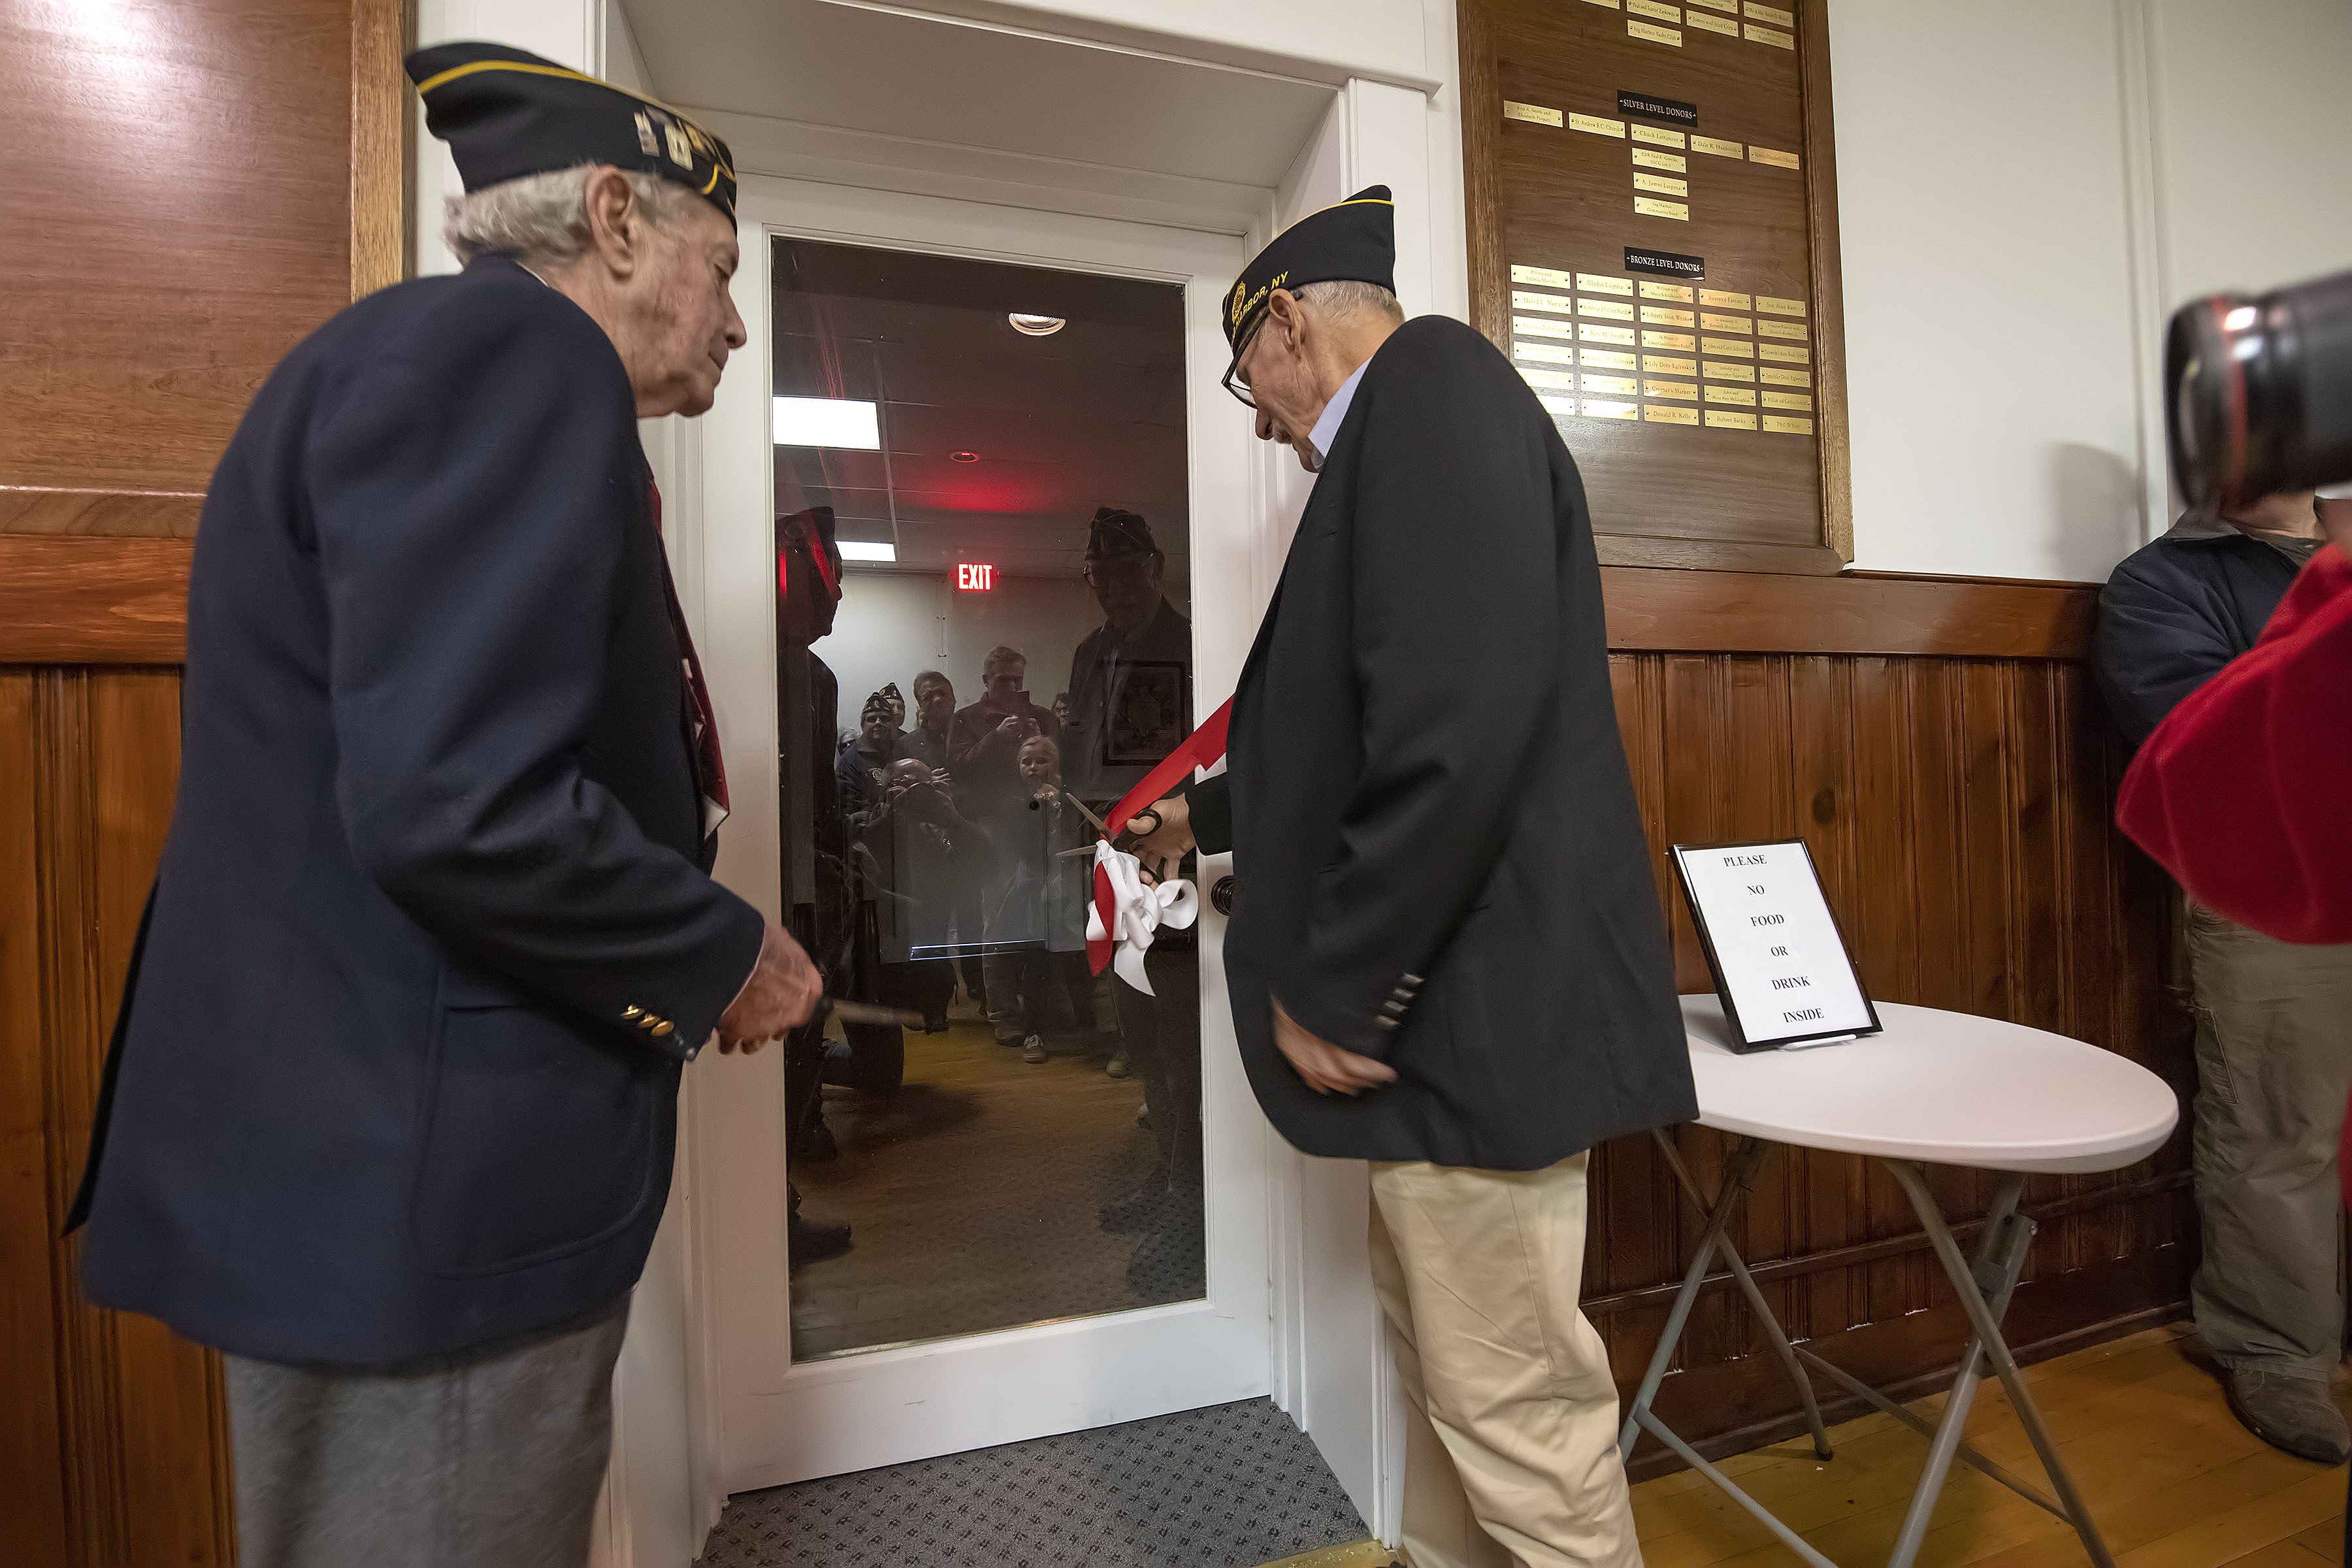 Sag Harbor veterans Chuck Lattanzio and Jim Laspesa cut the ribbon at the entrance of the new museum space at the American Legion Chelberg & Battle Post 388 following the 2019 Veterans Day Parade on Monday.   MICHAEL HELLER